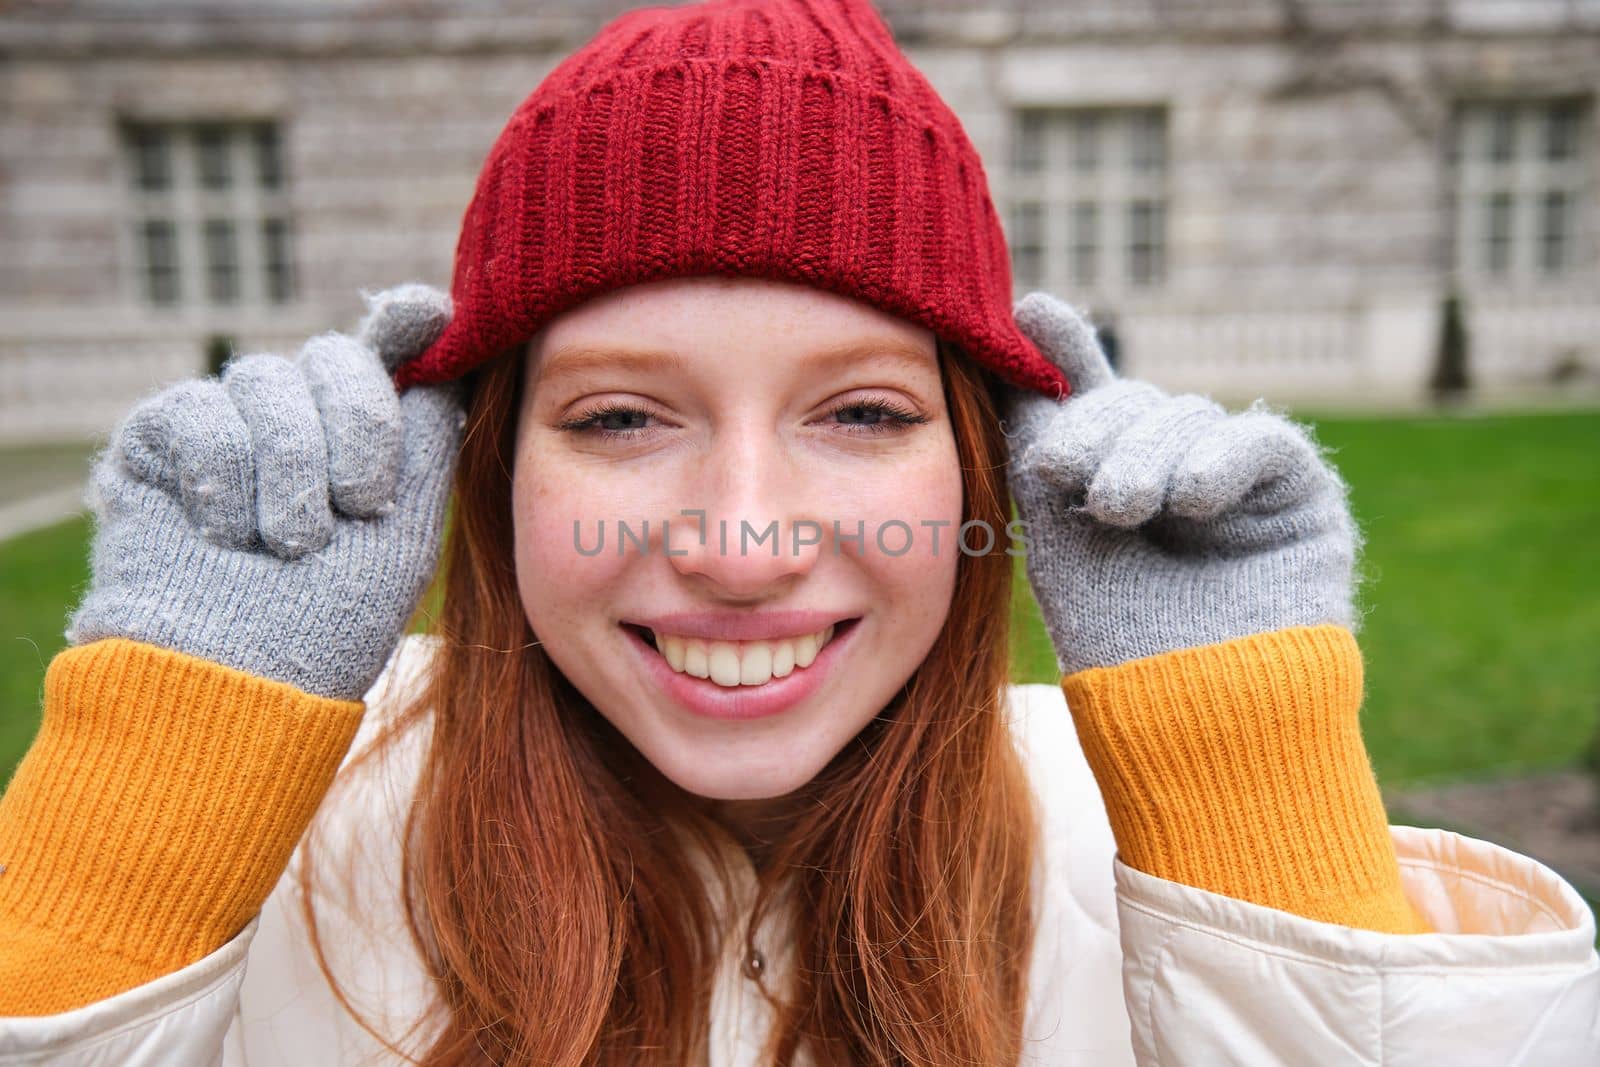 Close up portrait of beautiful redhead woman in red knitted hat, warm gloves, smiling and looking happy at camera, sitting in park.